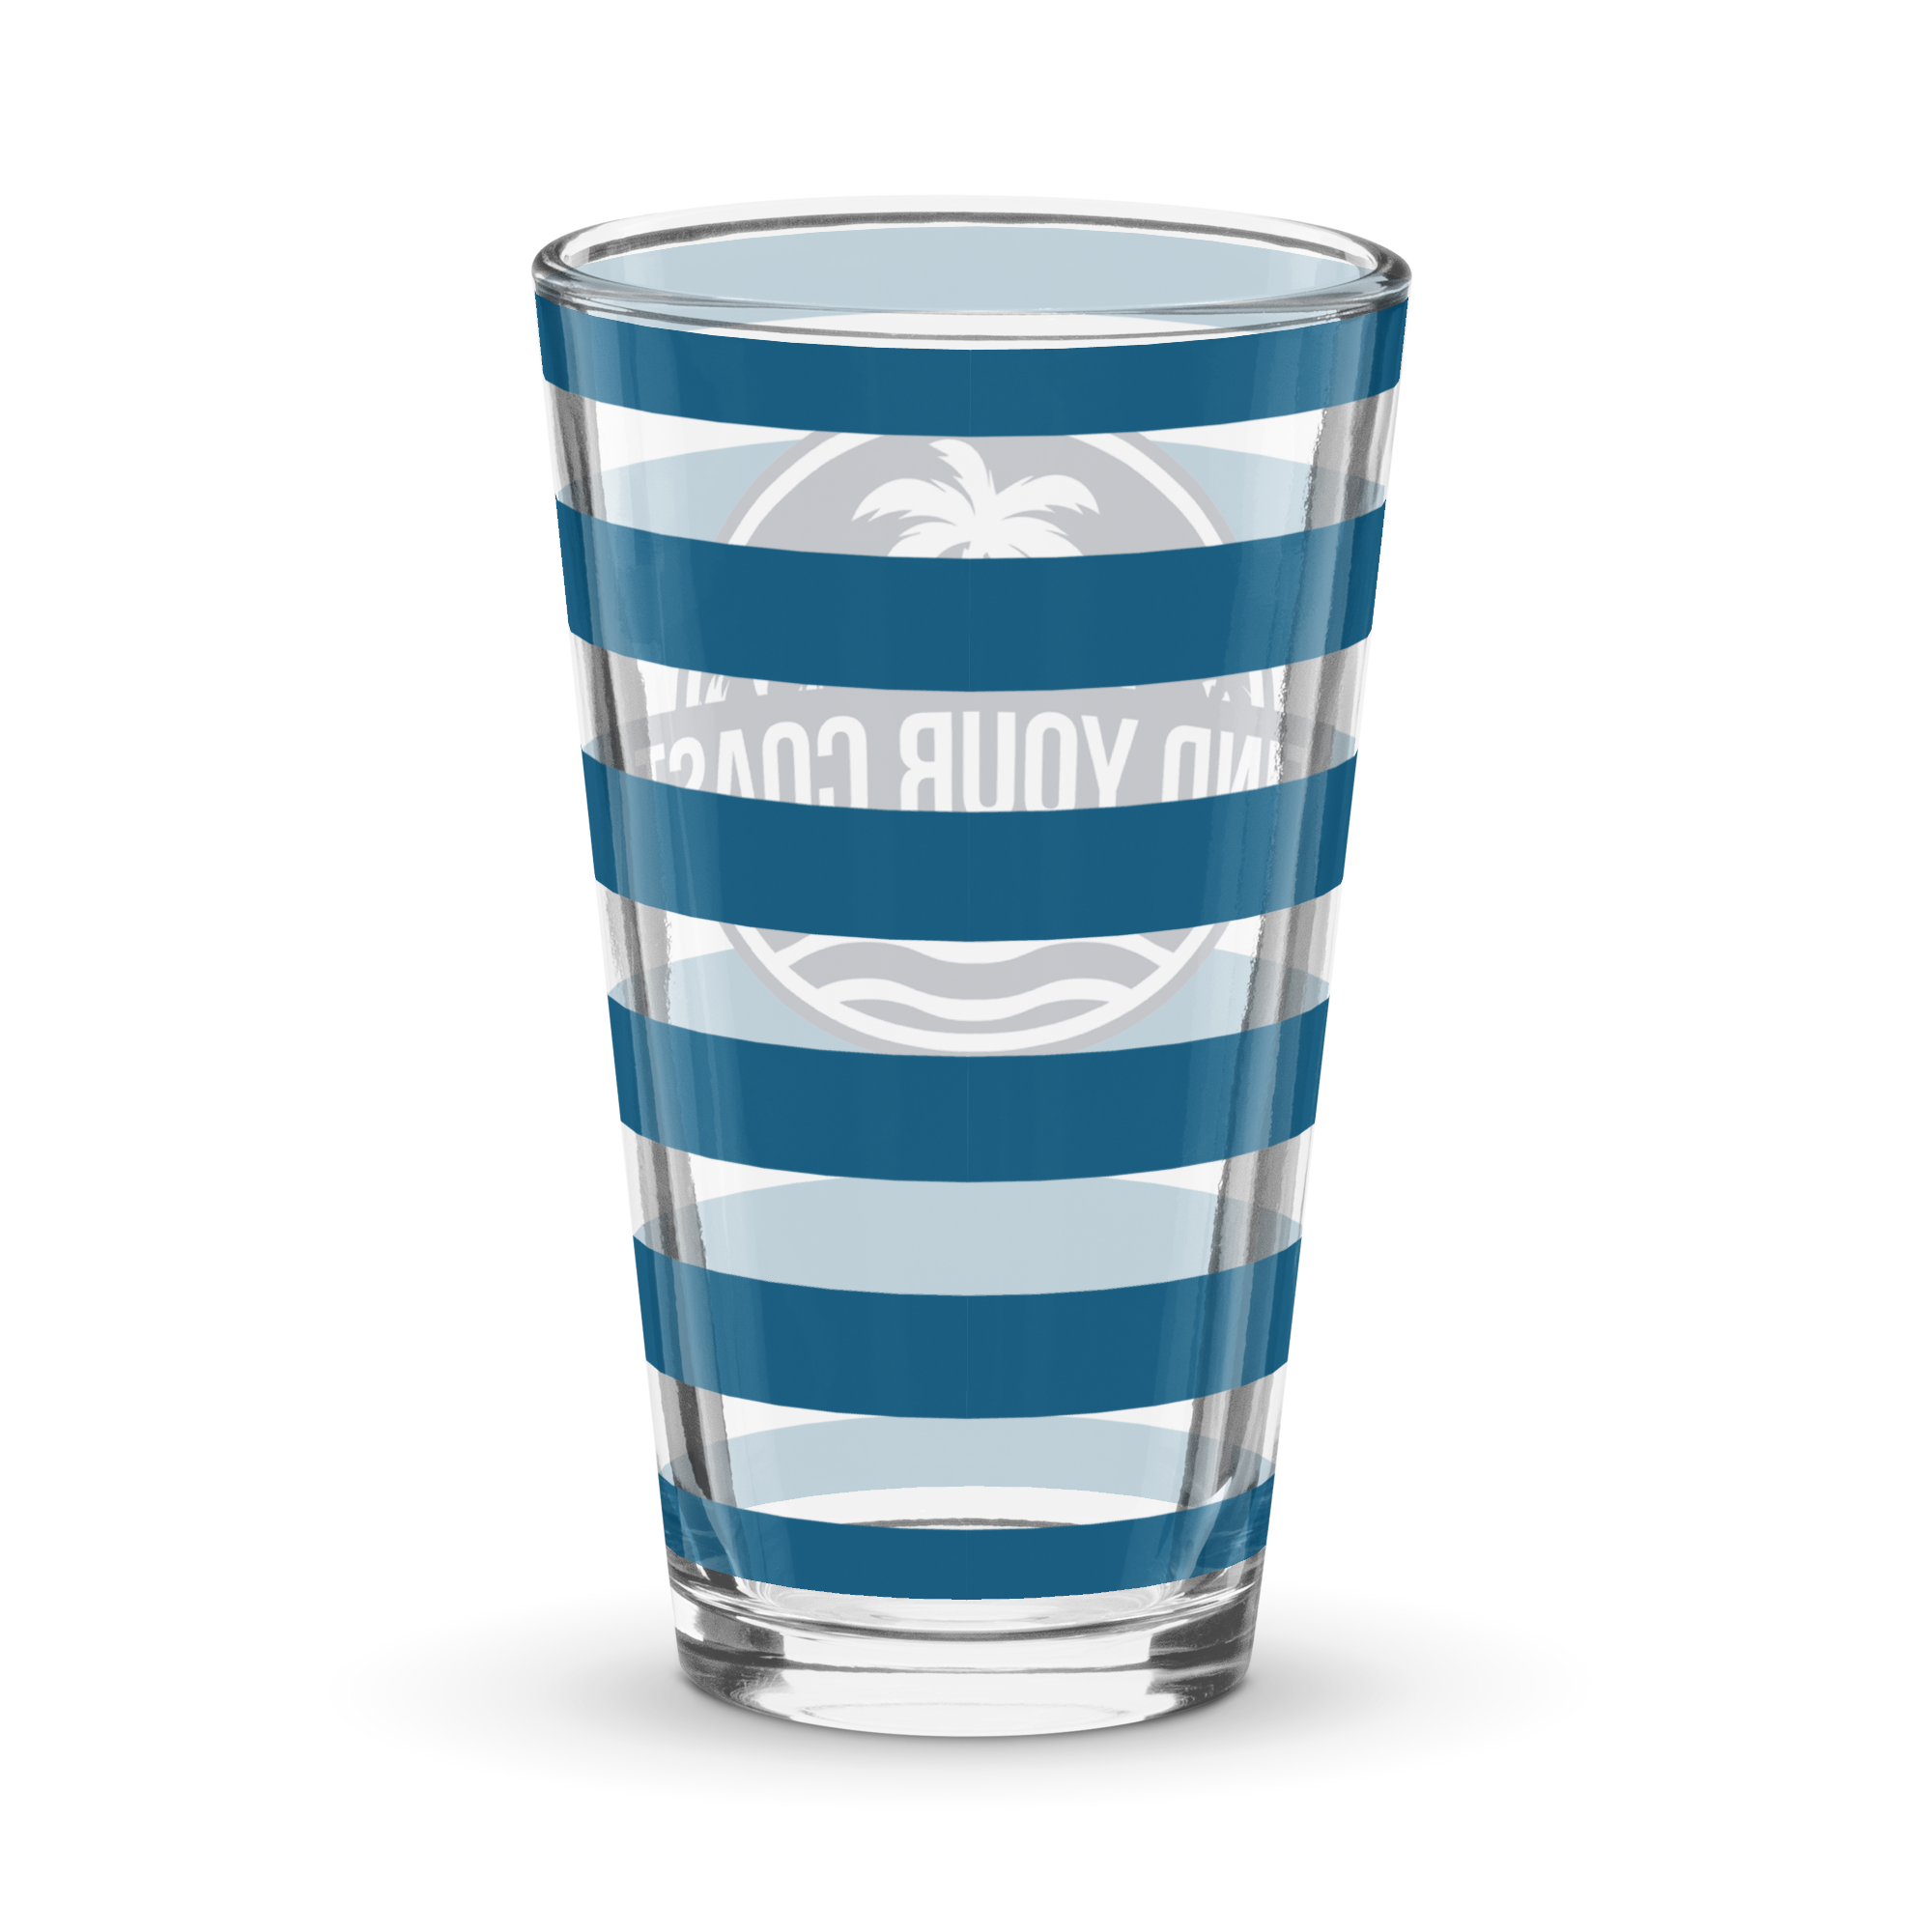 Find Your Coast® Marlin Shaker Pint Glass